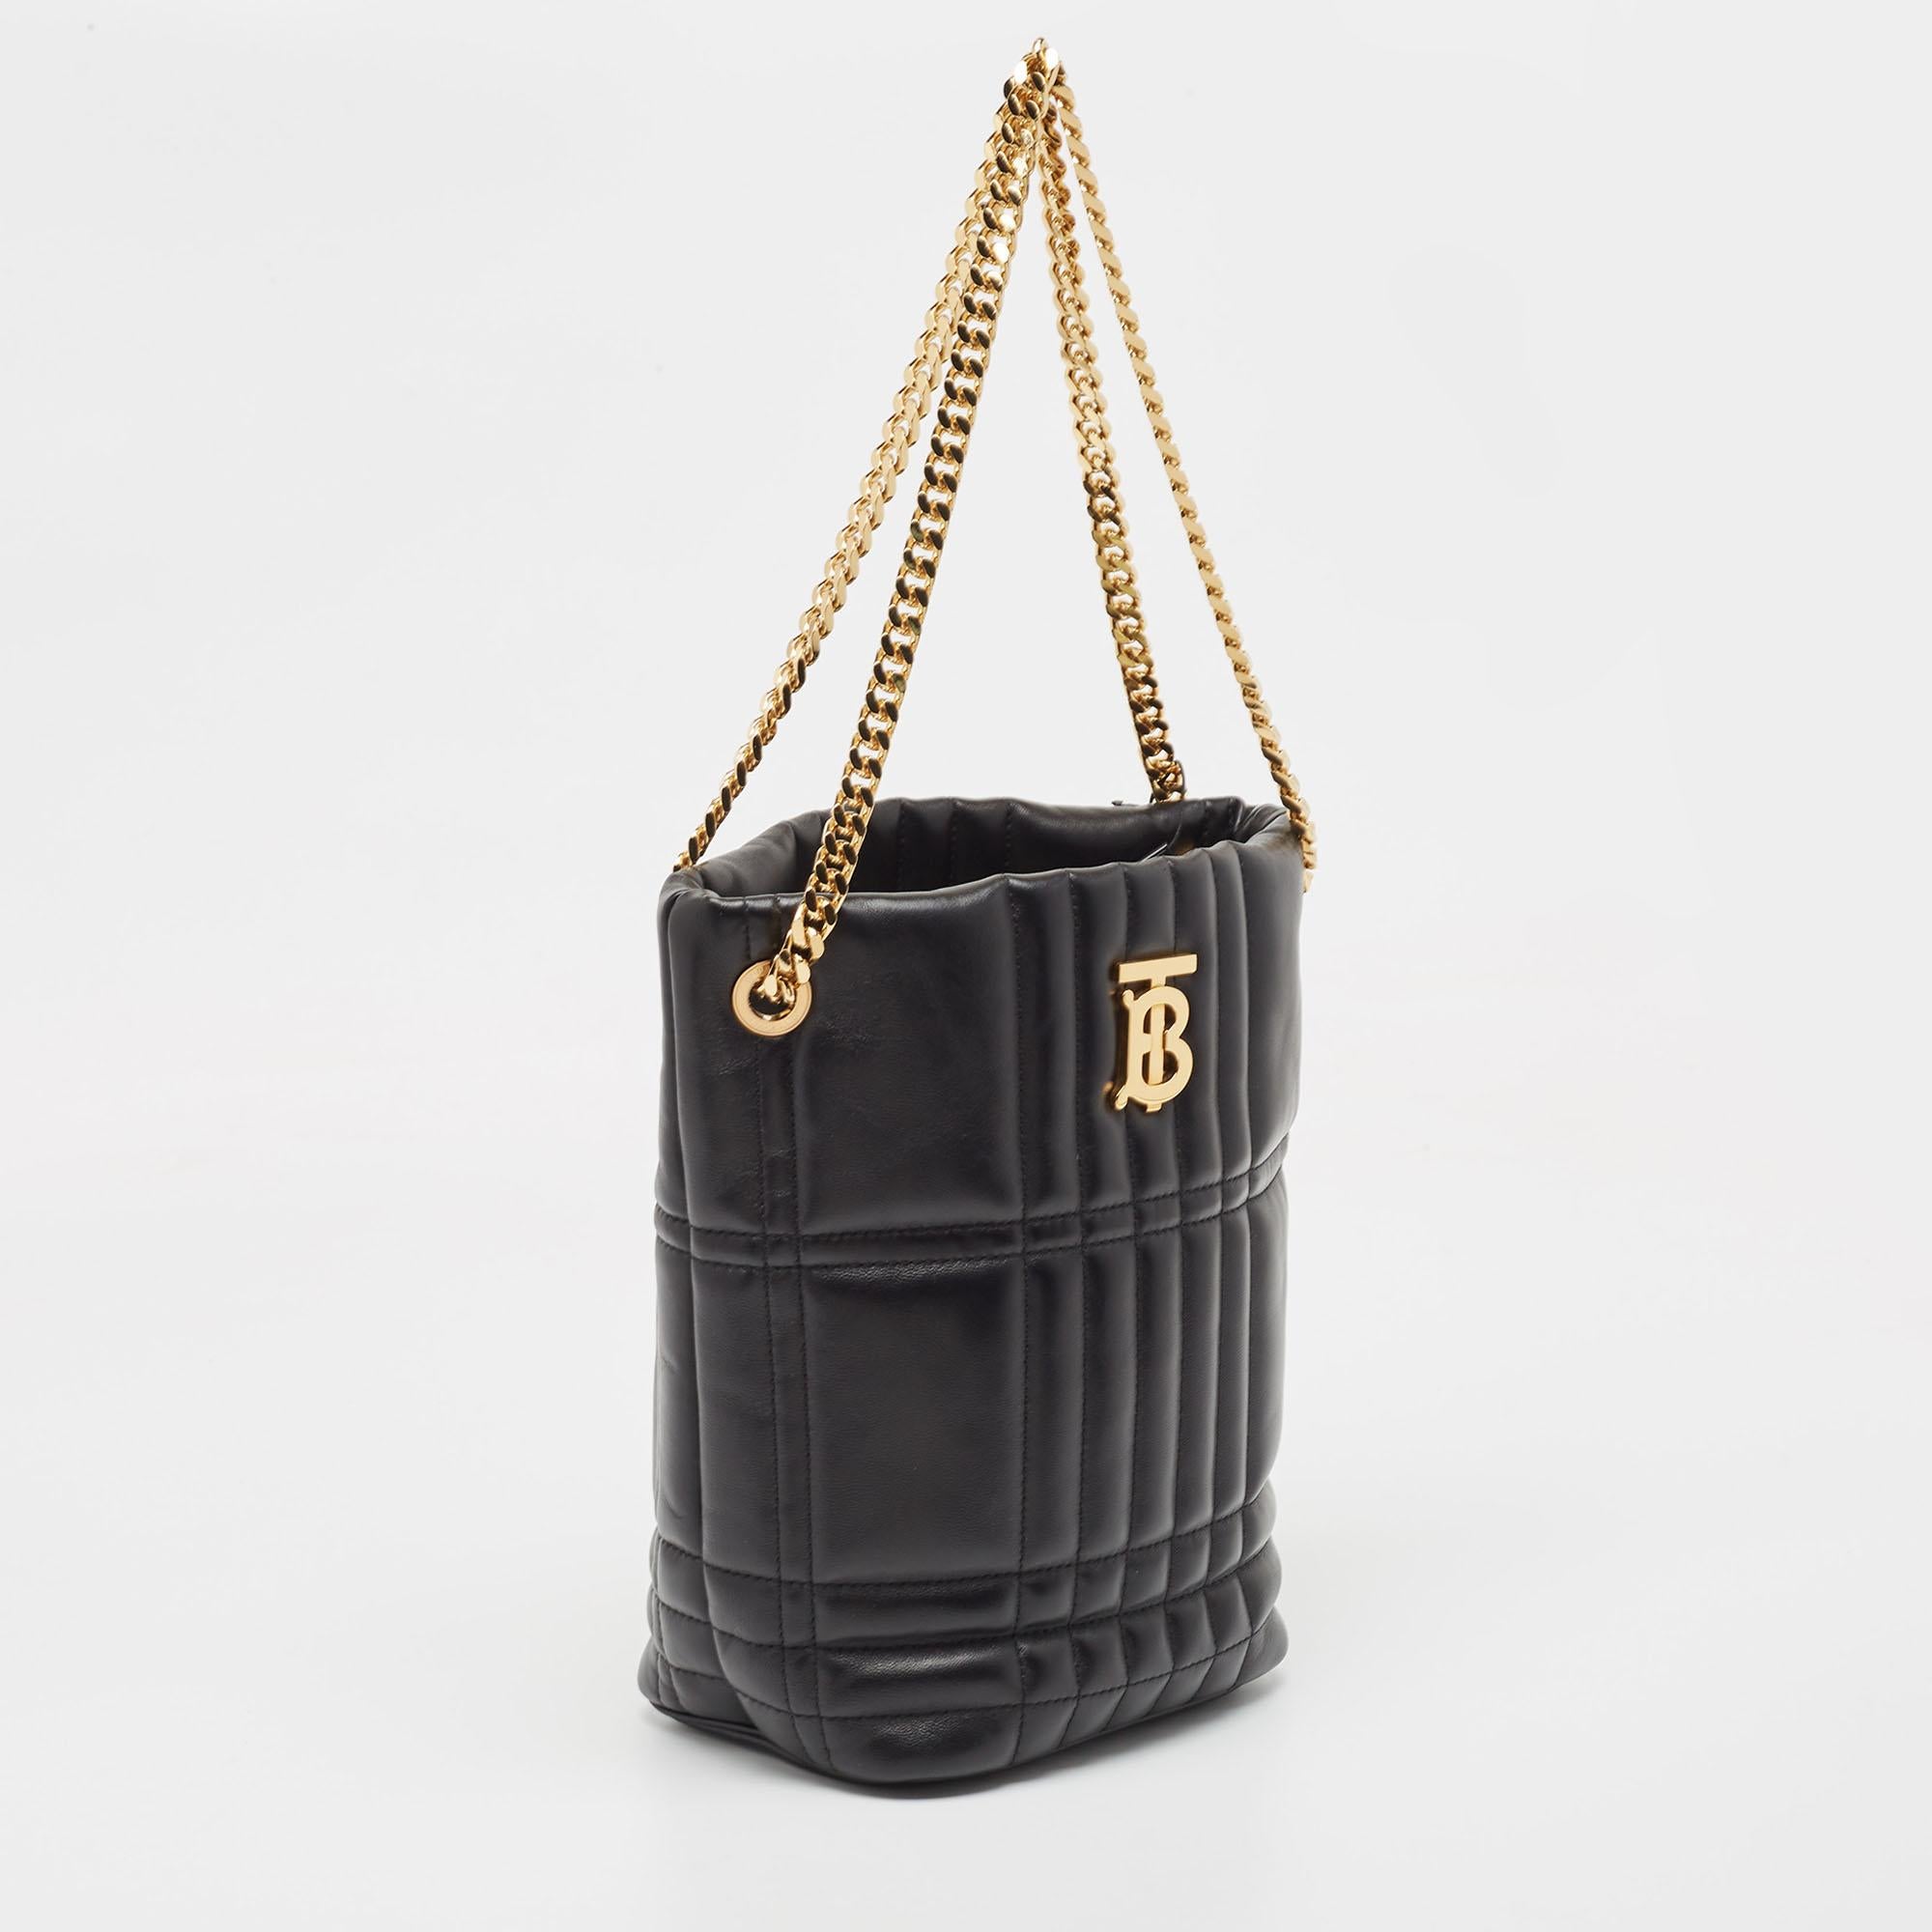 Burberry Black Embossed Quilt Leather Small Lola Bucket Bag 8